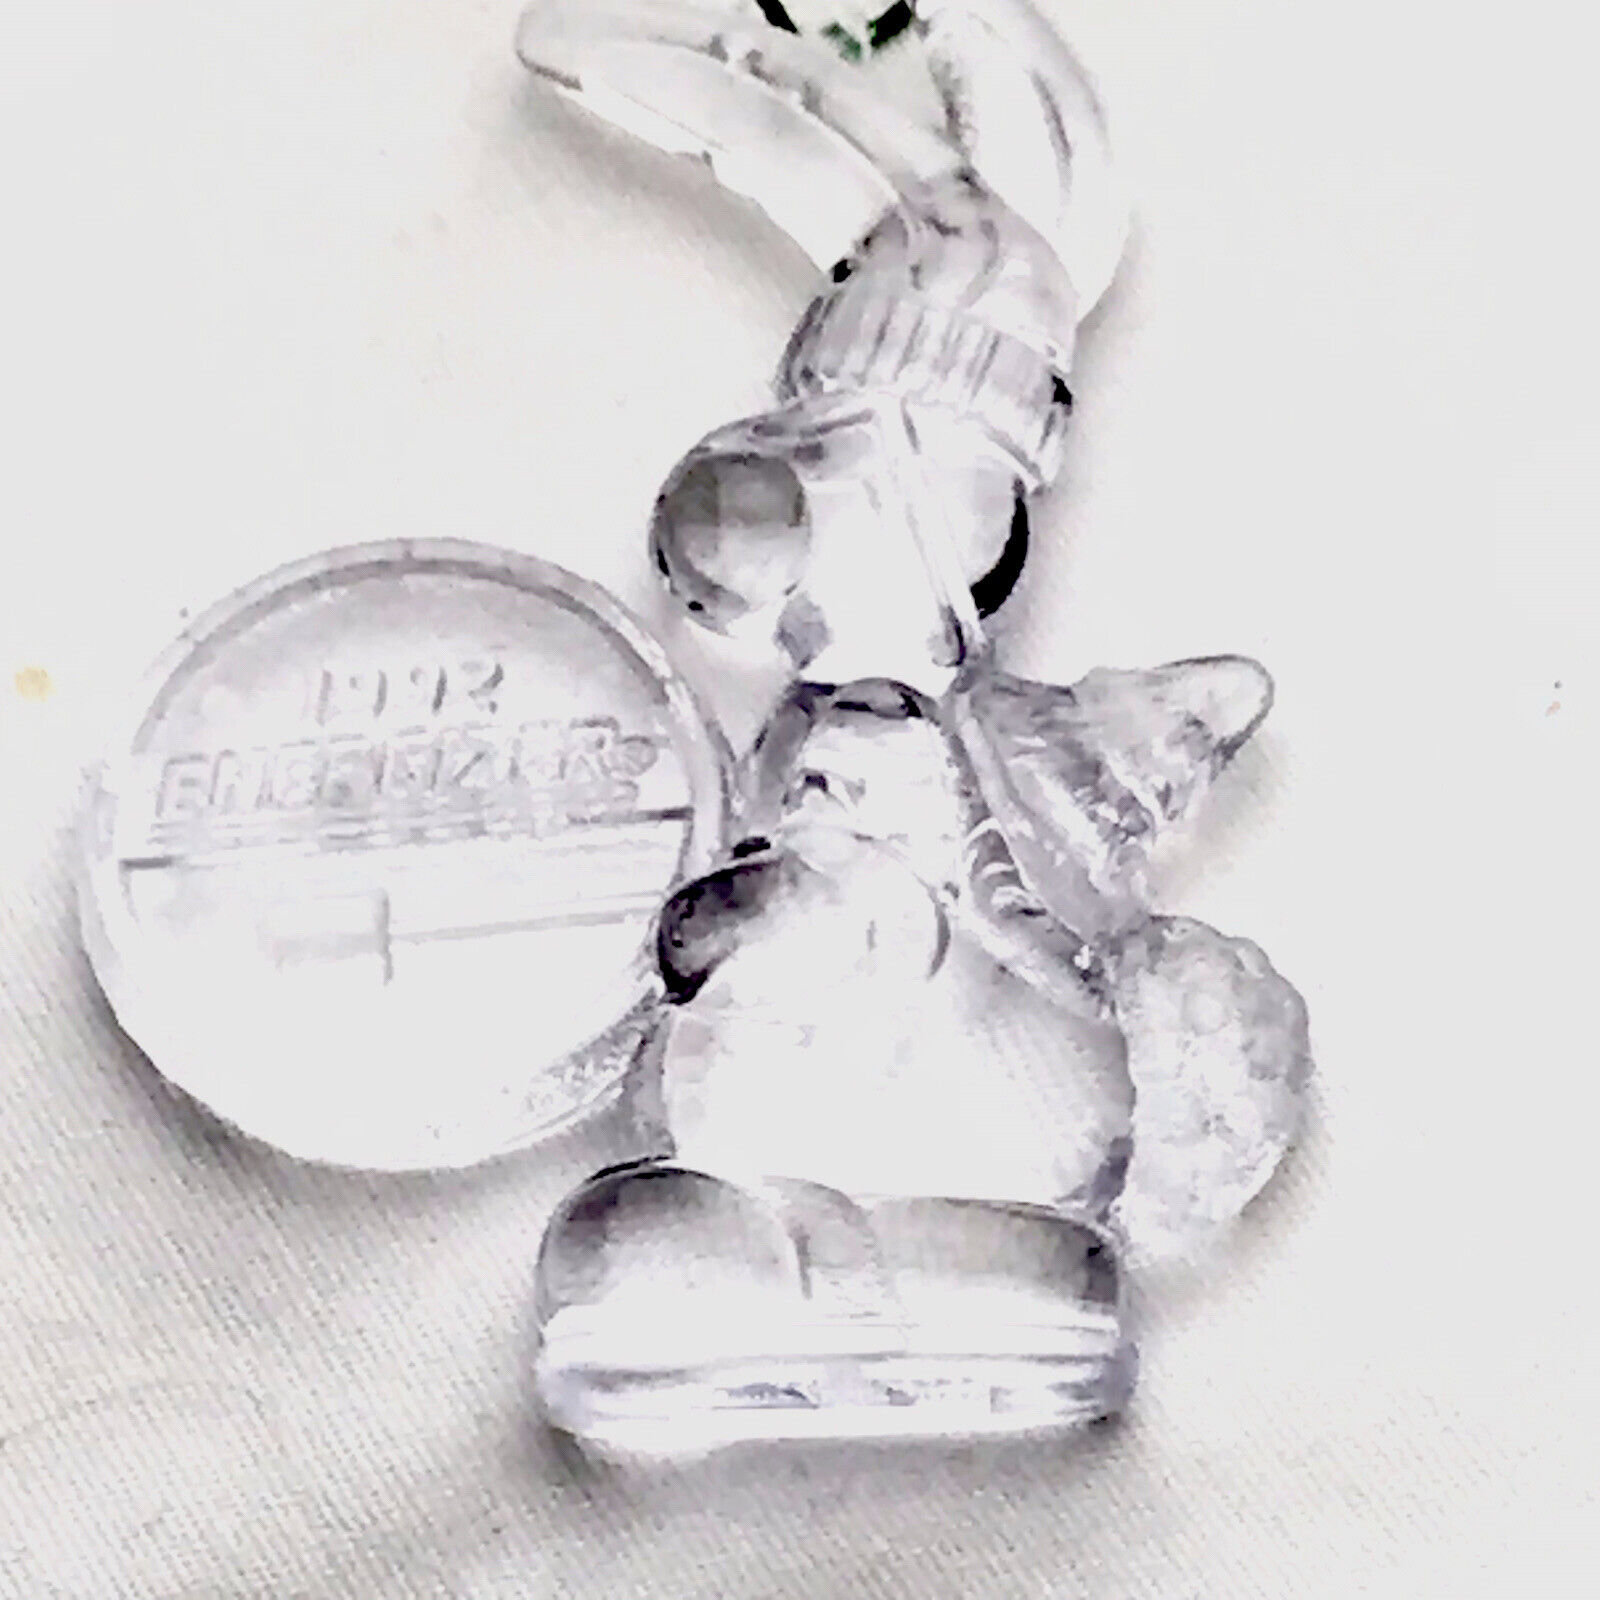 1992 Energizer Battery Bunny Mascot Christmas Ornament Clear Acrylic Vintage 90s